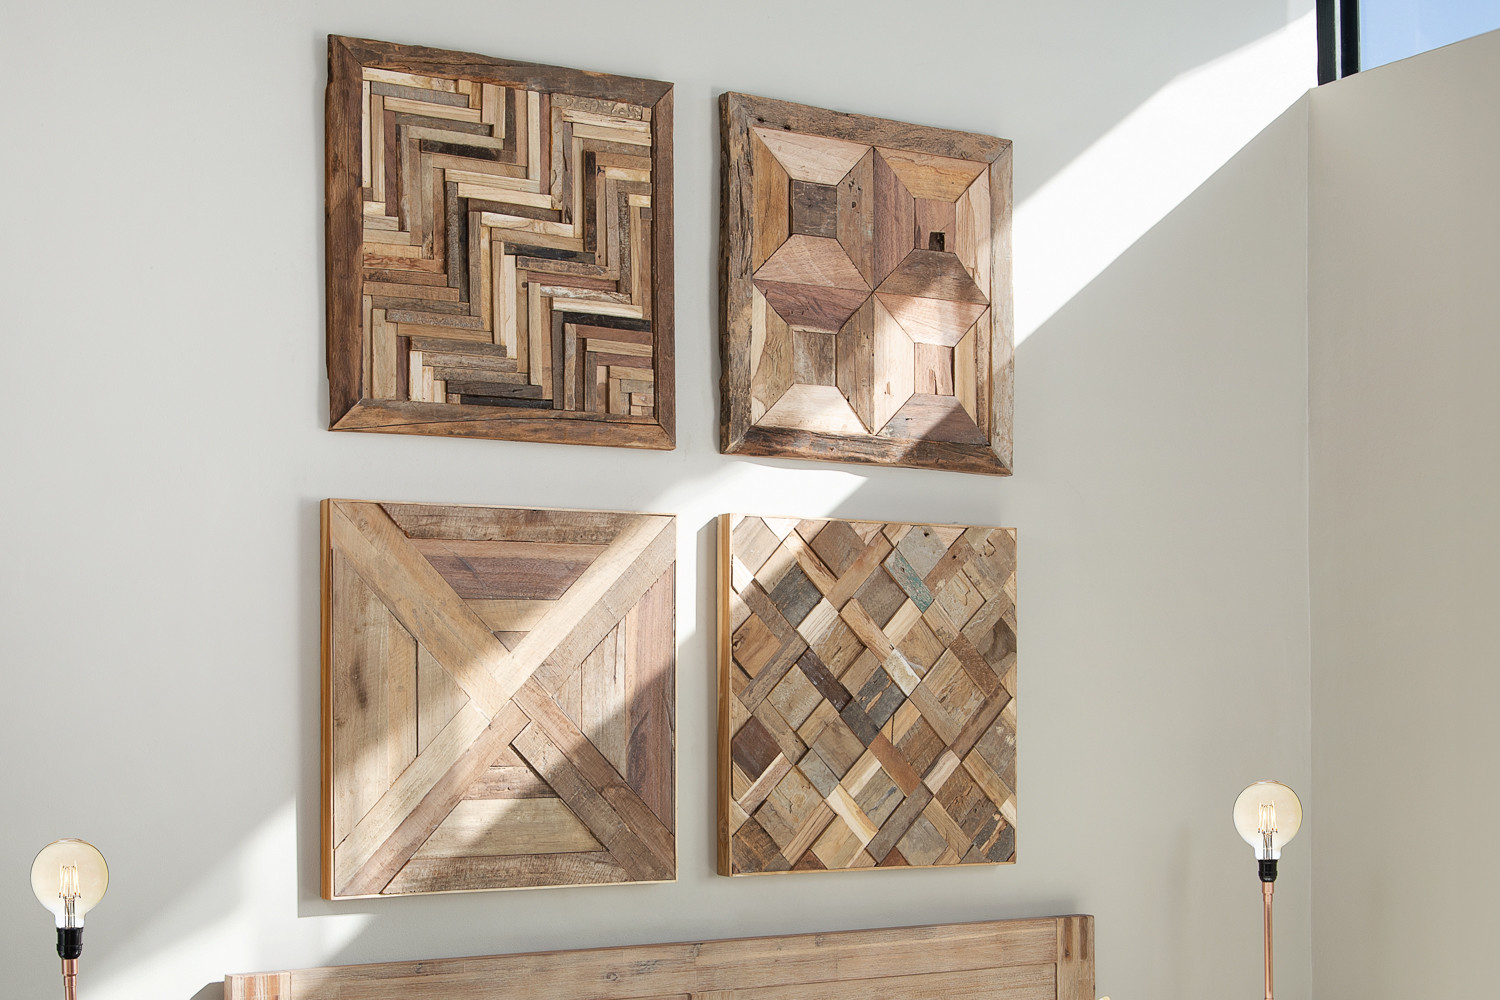 18 Rustic Wall Art & Decor Ideas That Will Transform Your Home - Craft-Mart